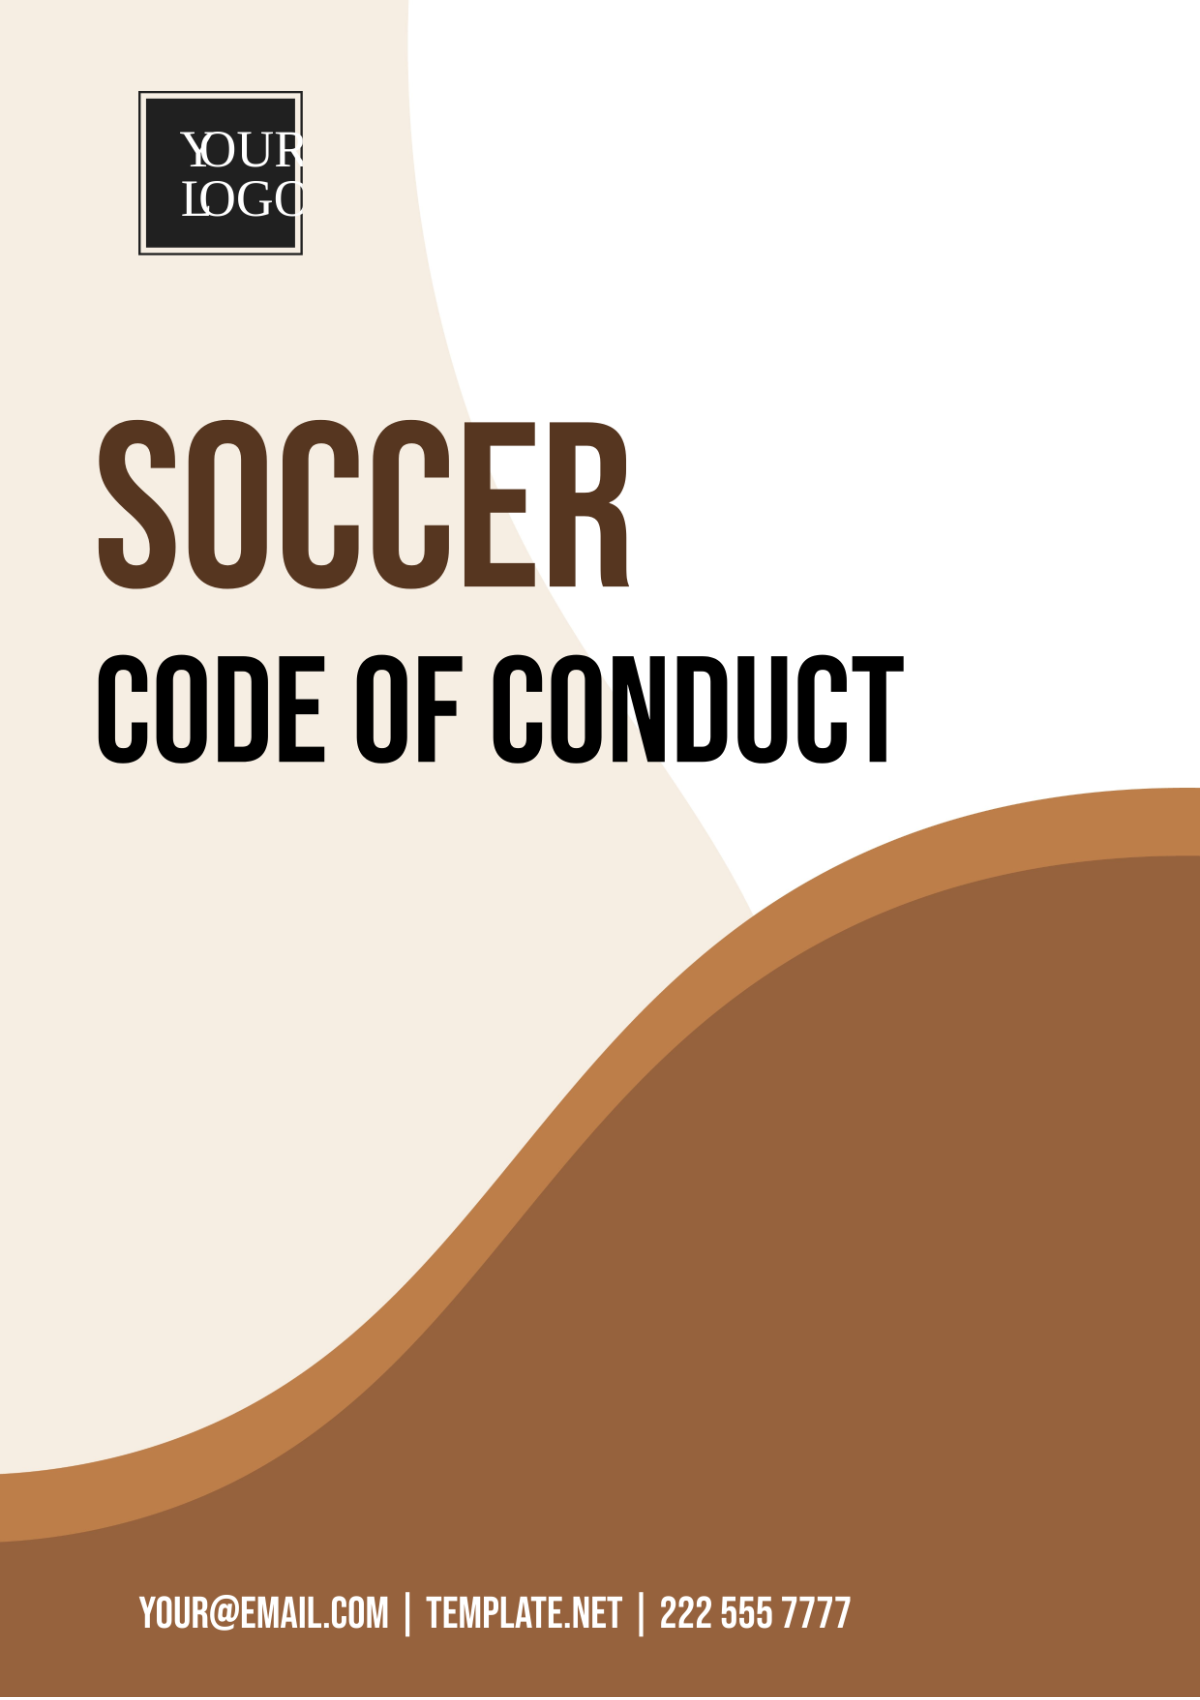 Soccer Code of Conduct Template